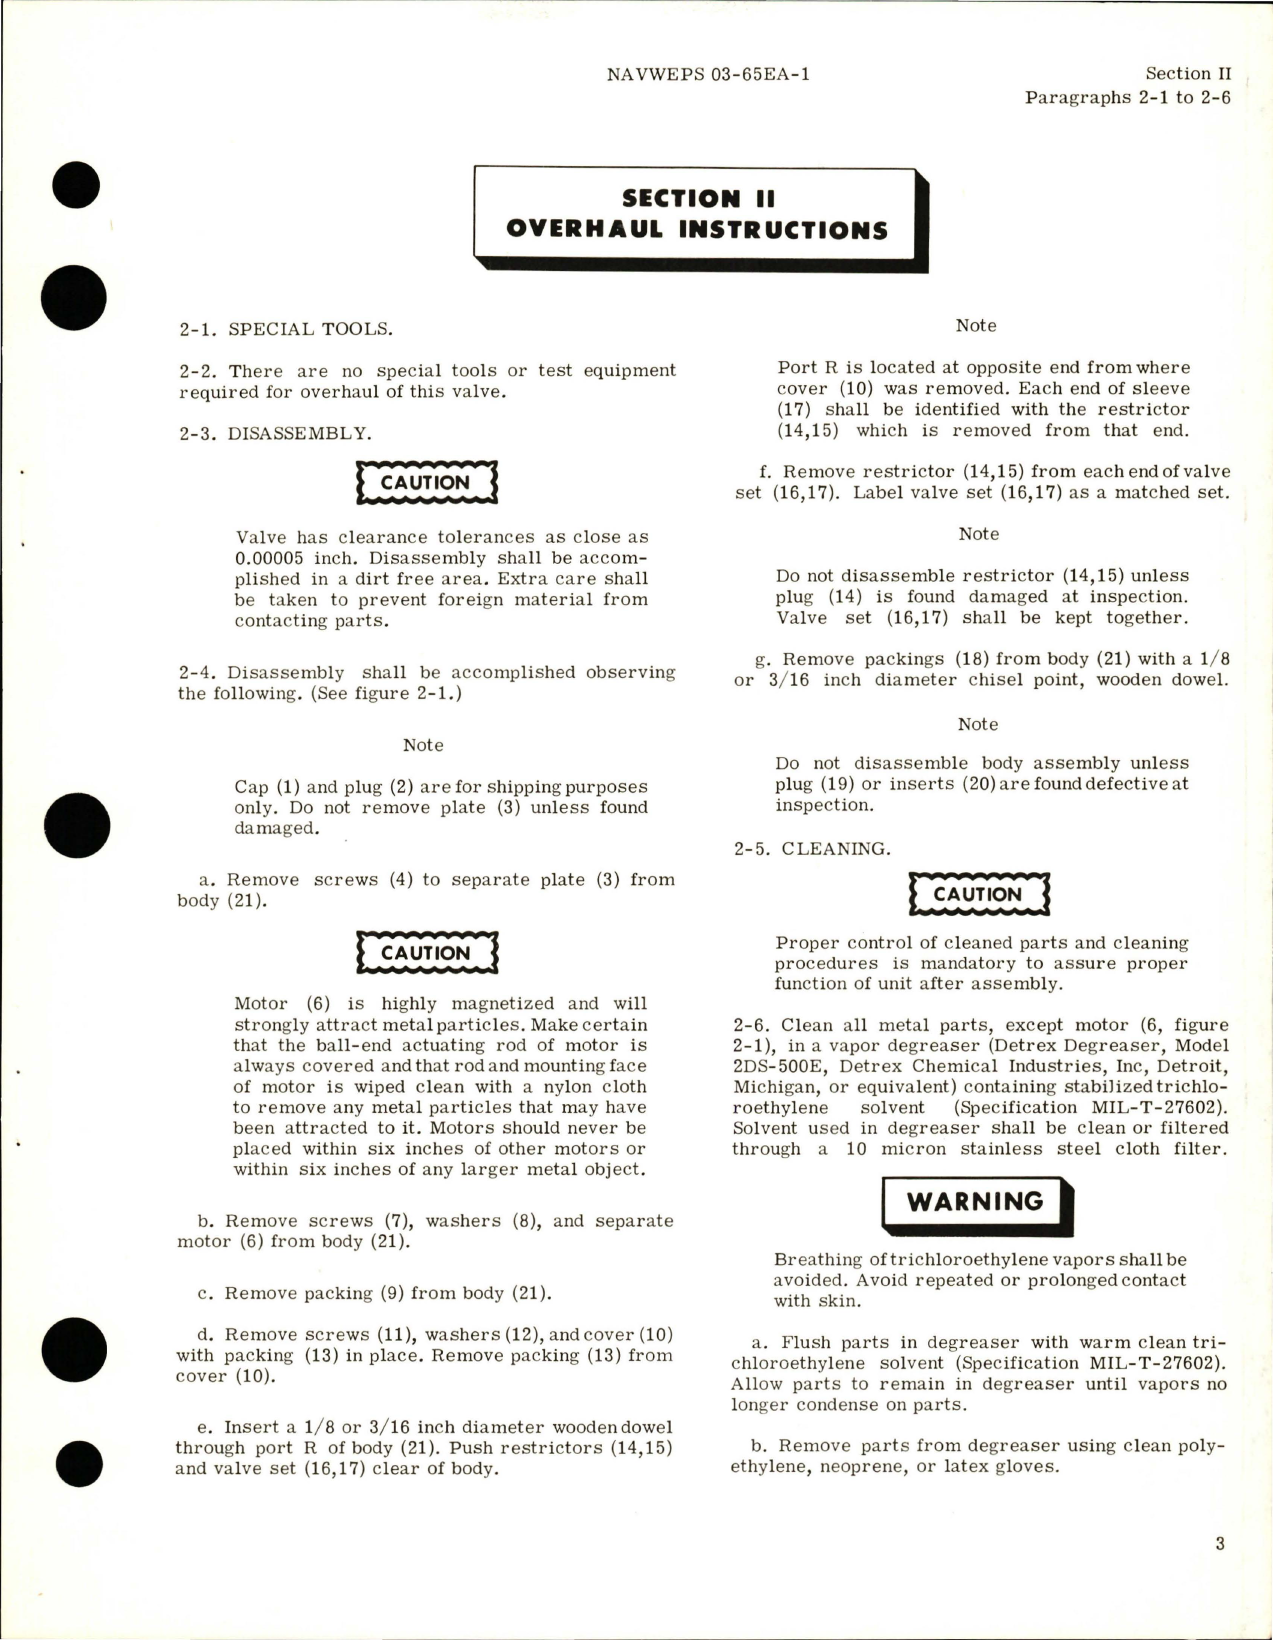 Sample page 7 from AirCorps Library document: Overhaul Instructions for Hydraulic Servo Valve - Part 124648-1-1